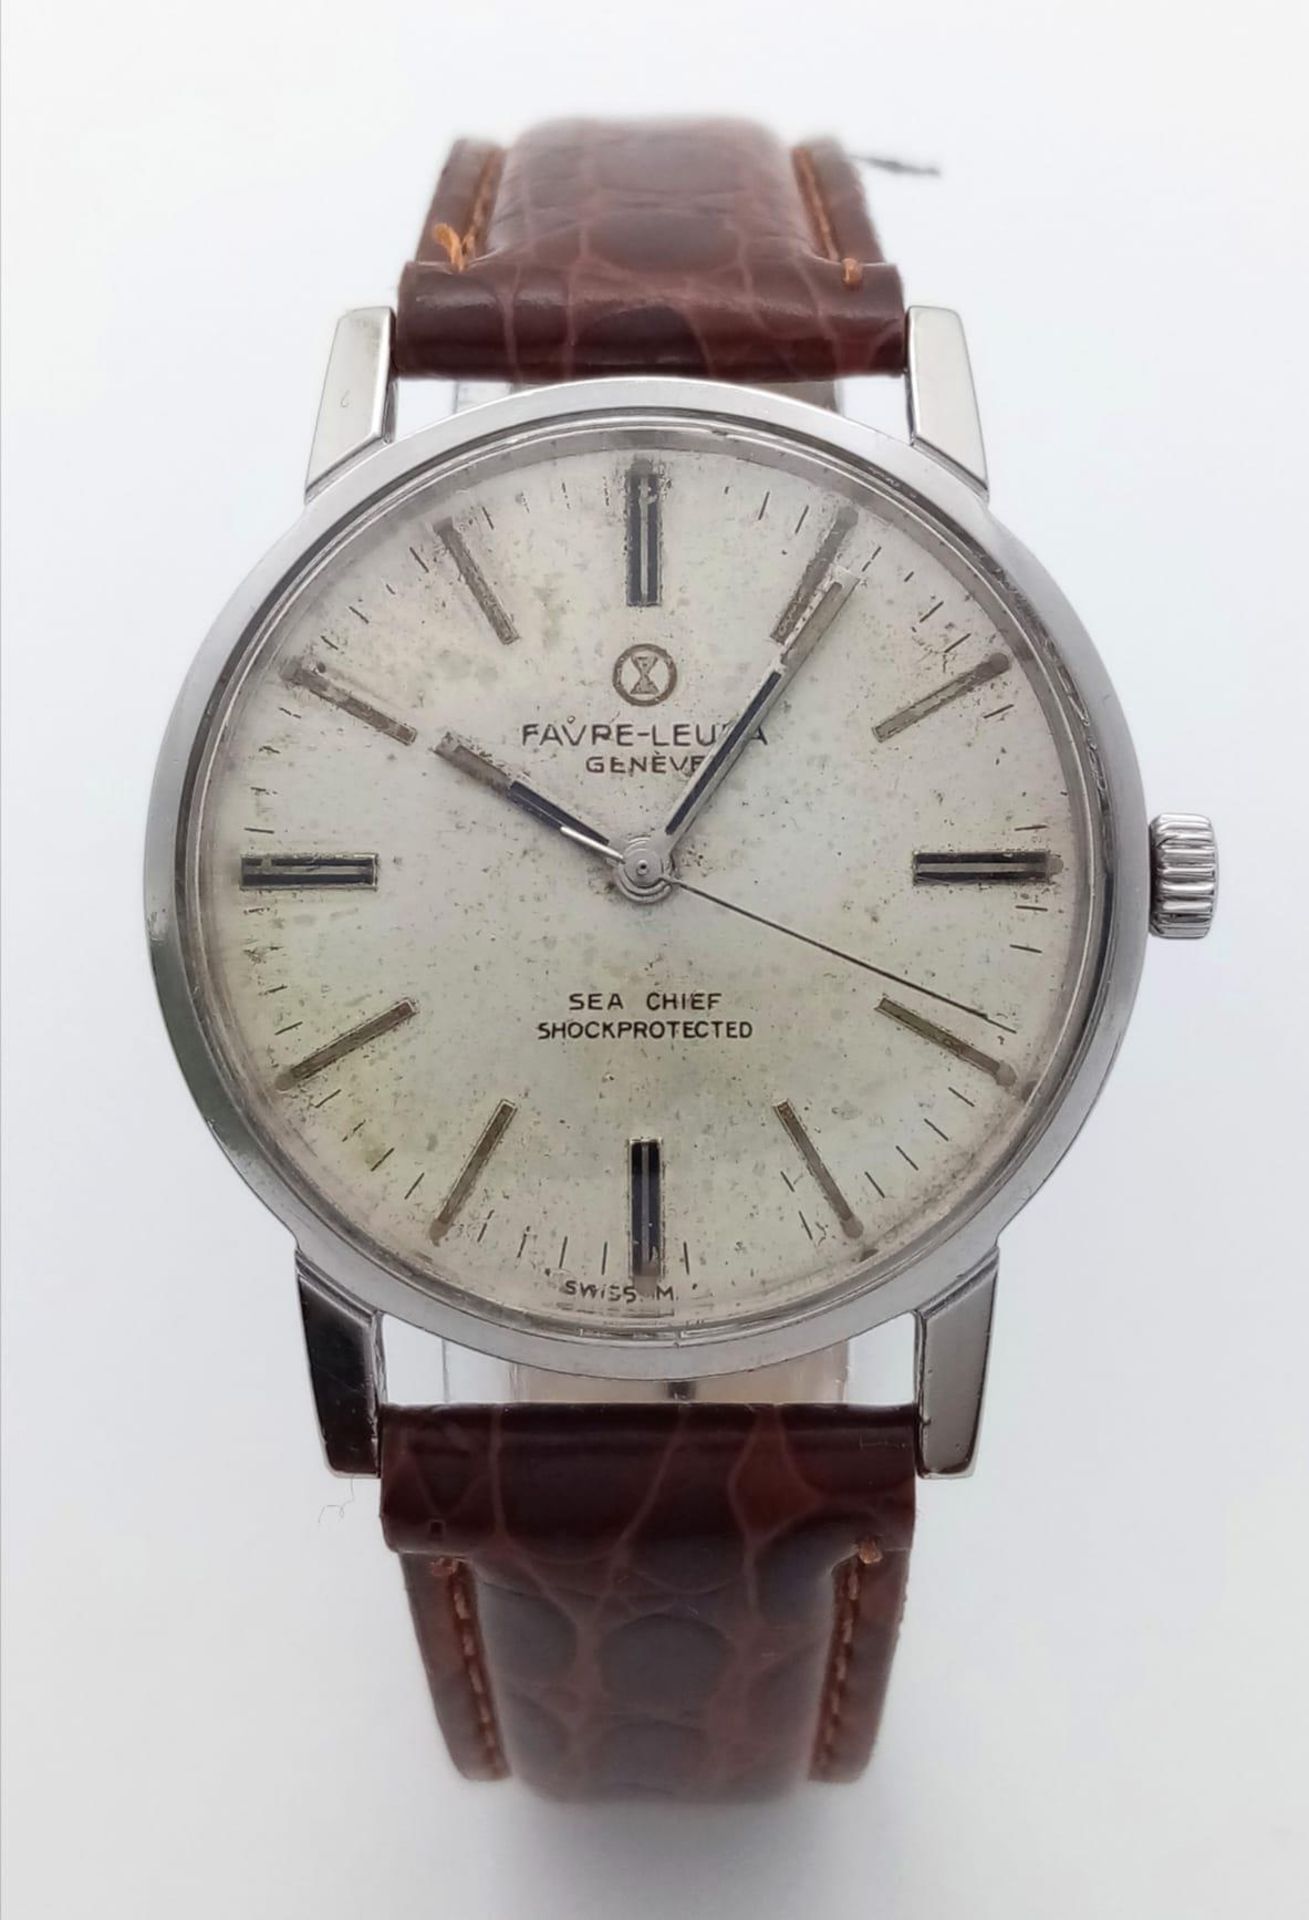 A Vintage Favre-Leuba Sea-Chief Gents Watch. Brown leather strap. Stainless steel case - 35mm. White